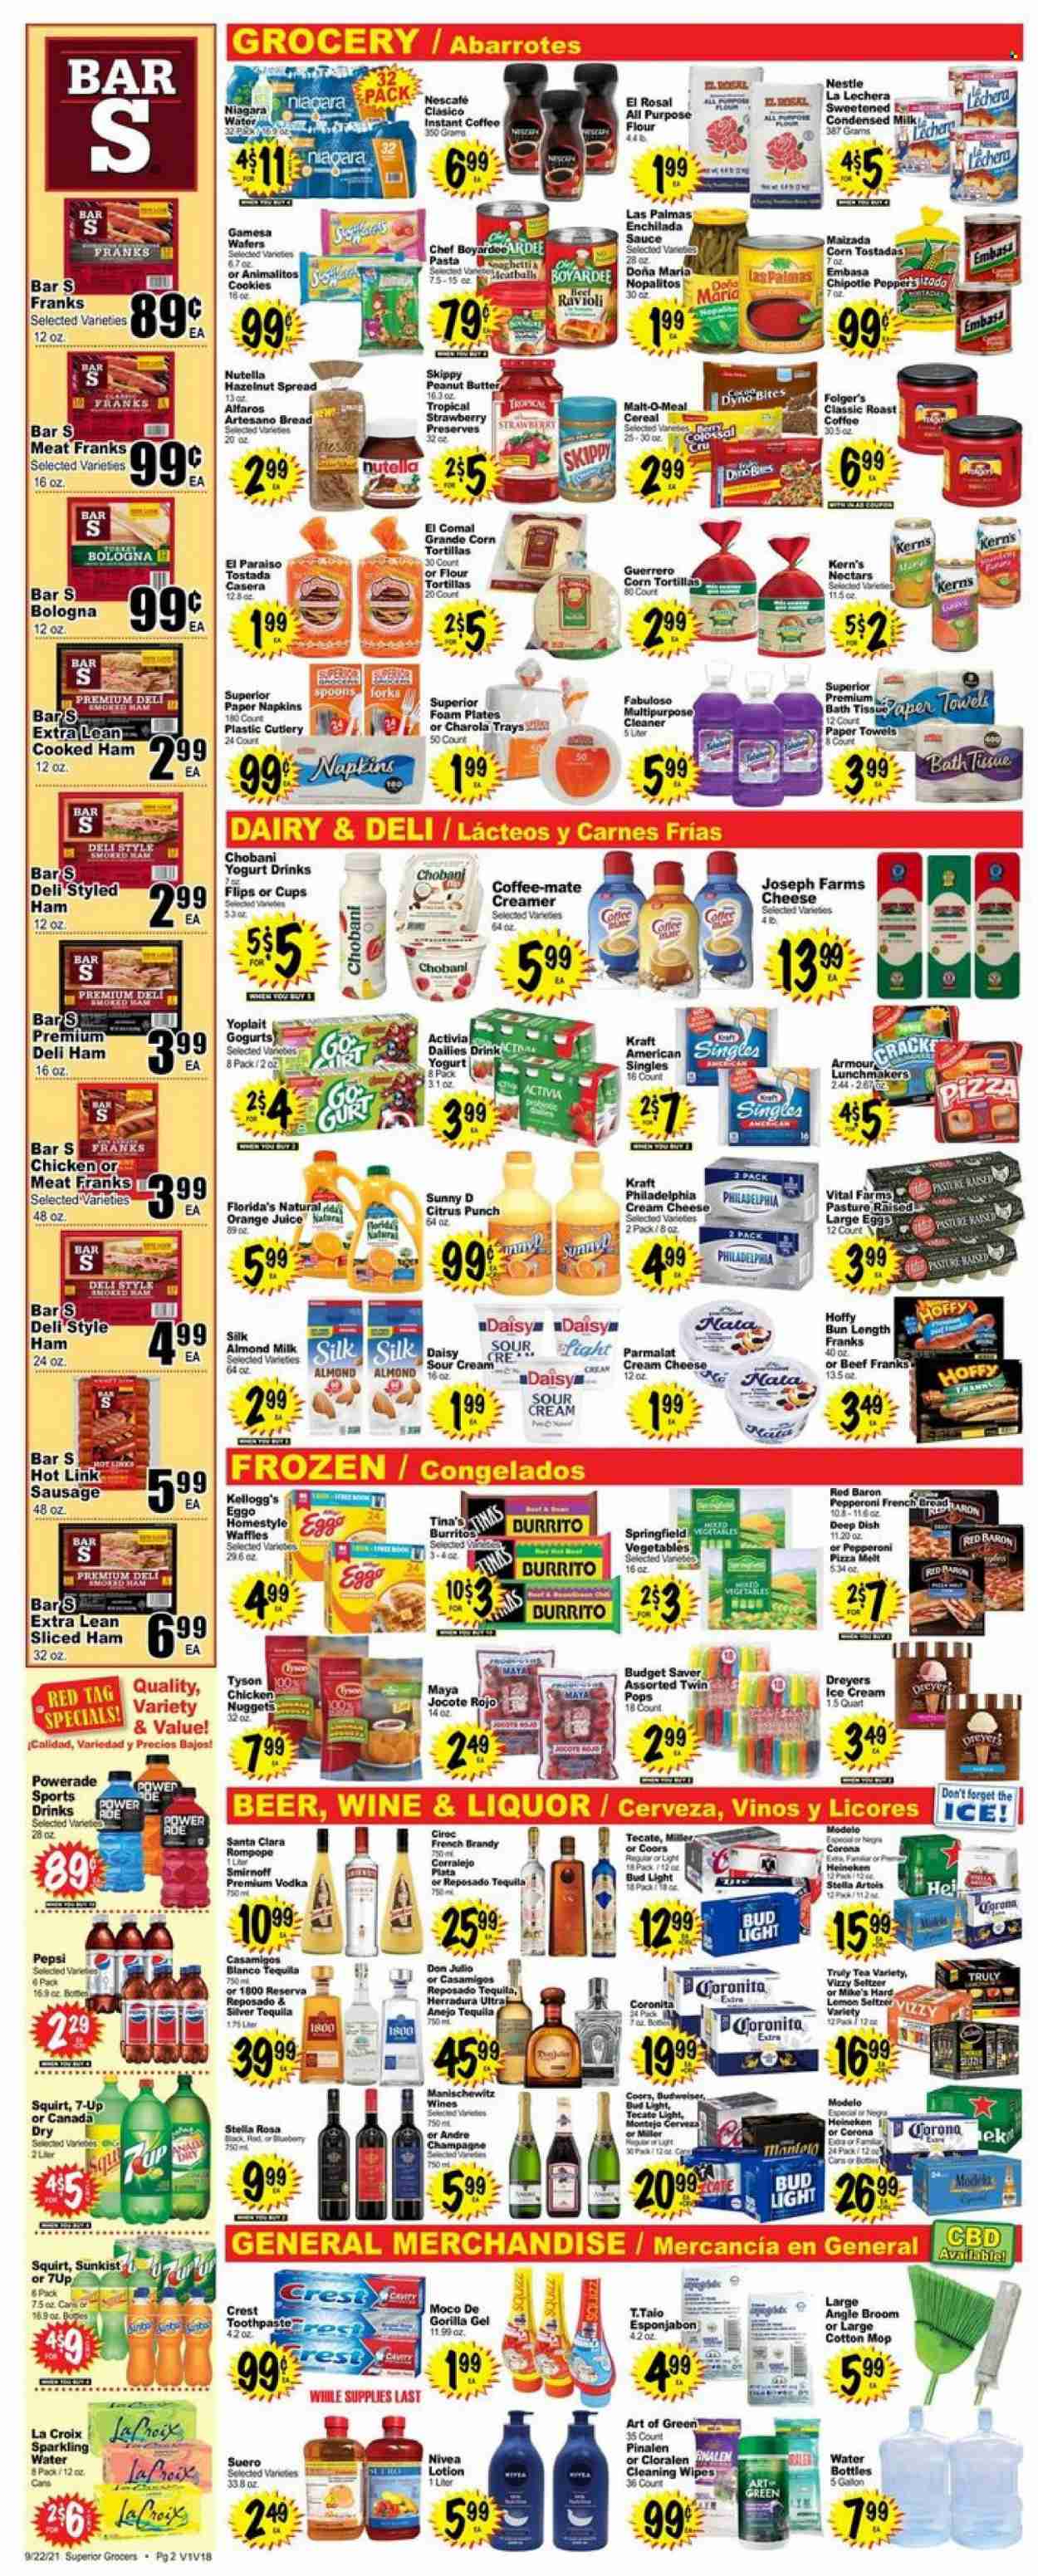 Superior Grocers ad  - 09.22.2021 - 09.28.2021.